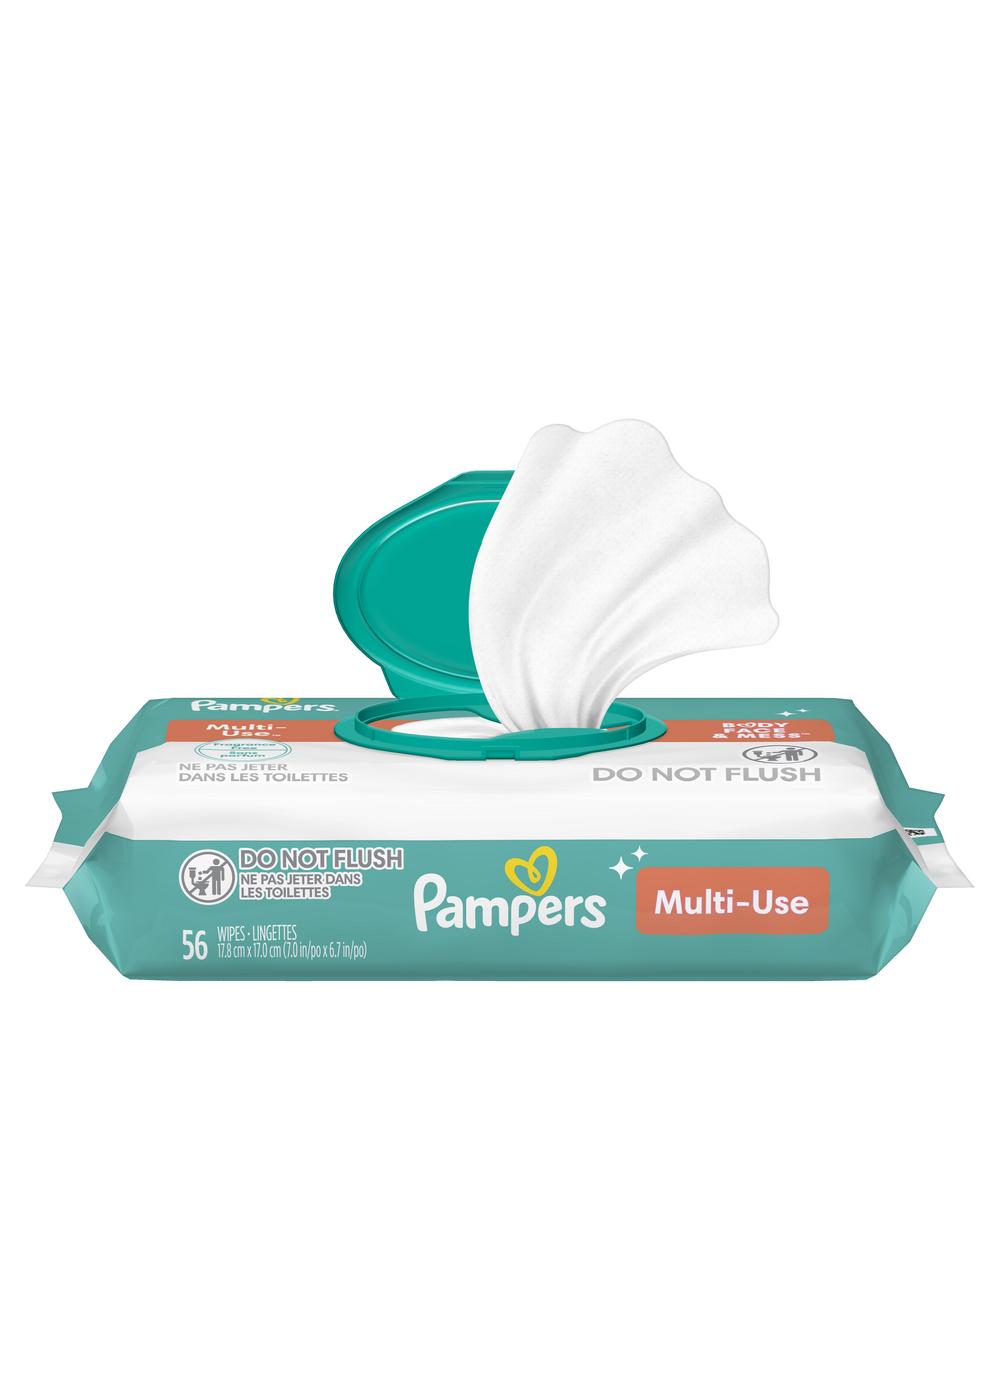 Pampers® Fragrance Free Wipes